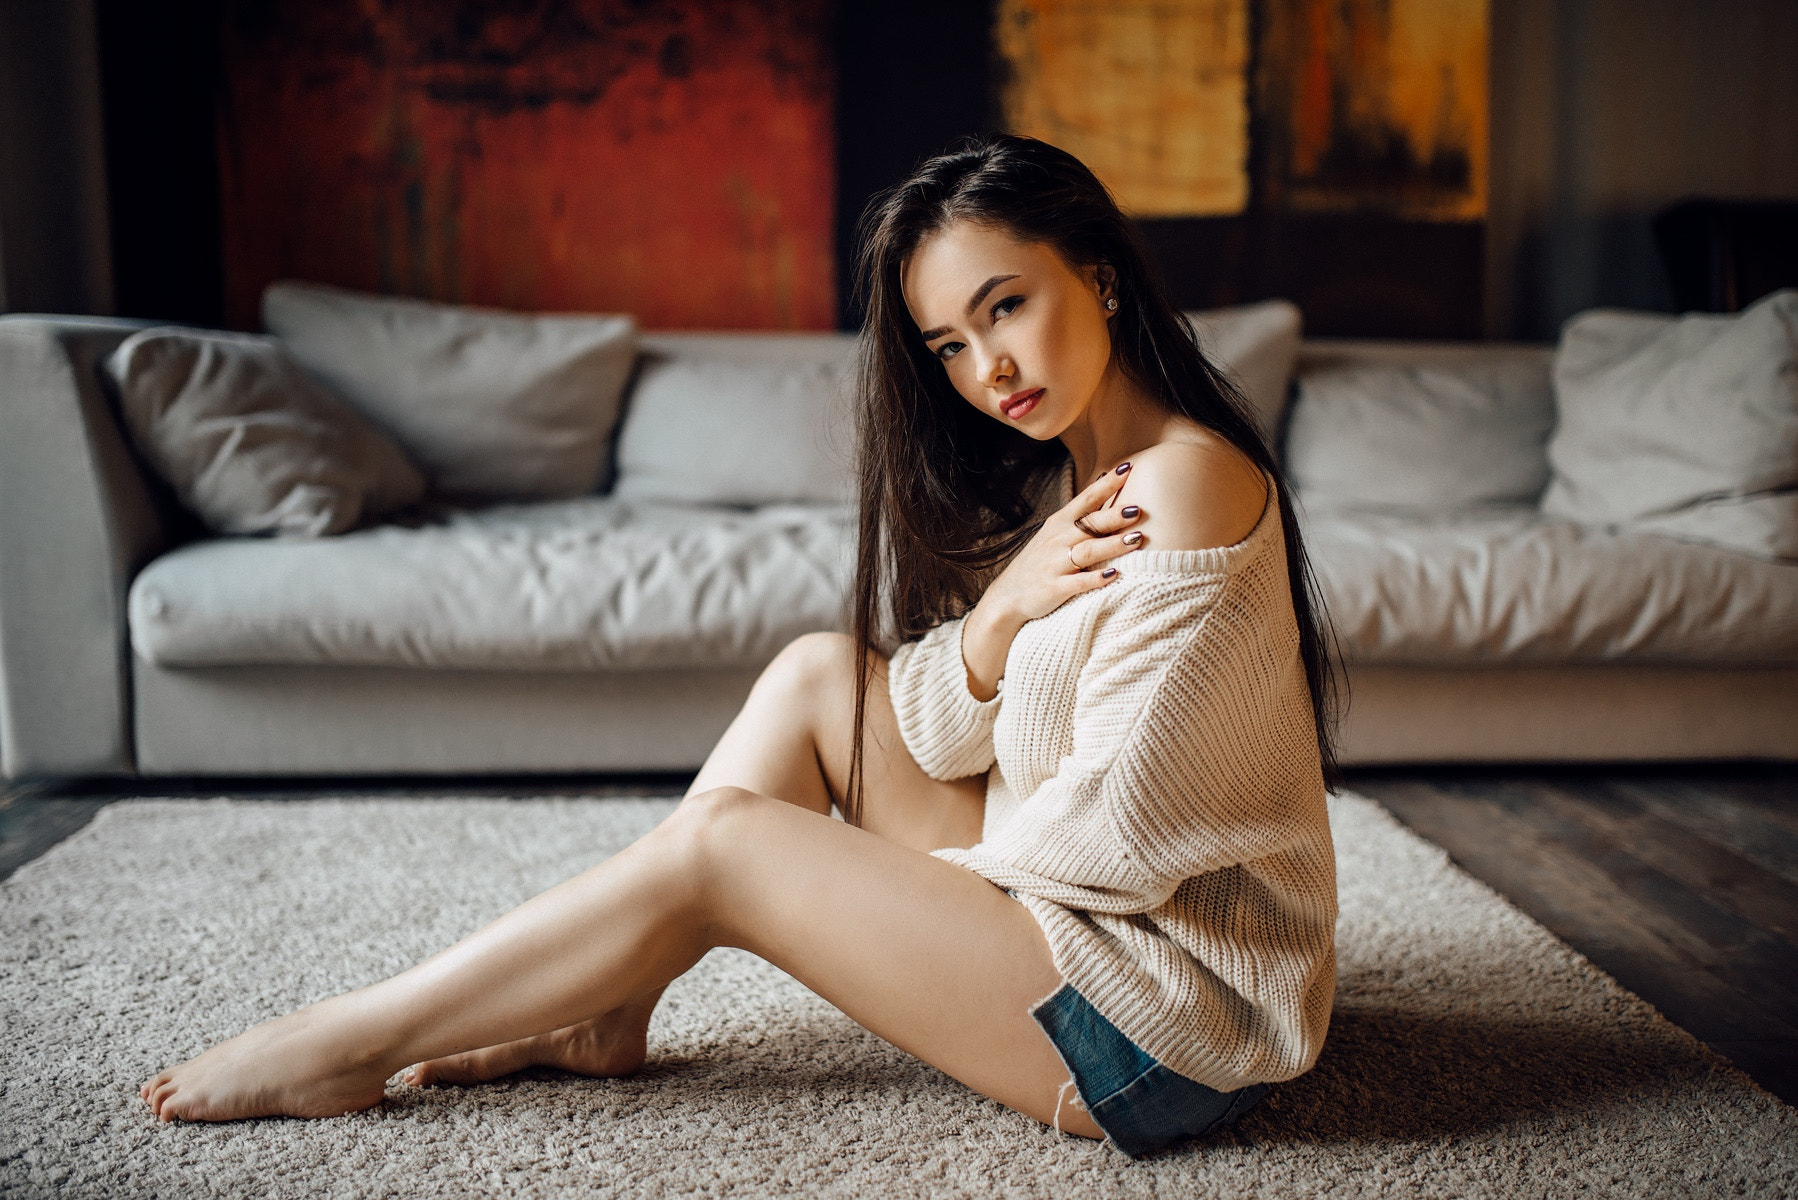 People 1798x1200 women jean shorts portrait couch red lipstick on the floor painted nails dark hair grey sofa living rooms white sweater sweater bare shoulders